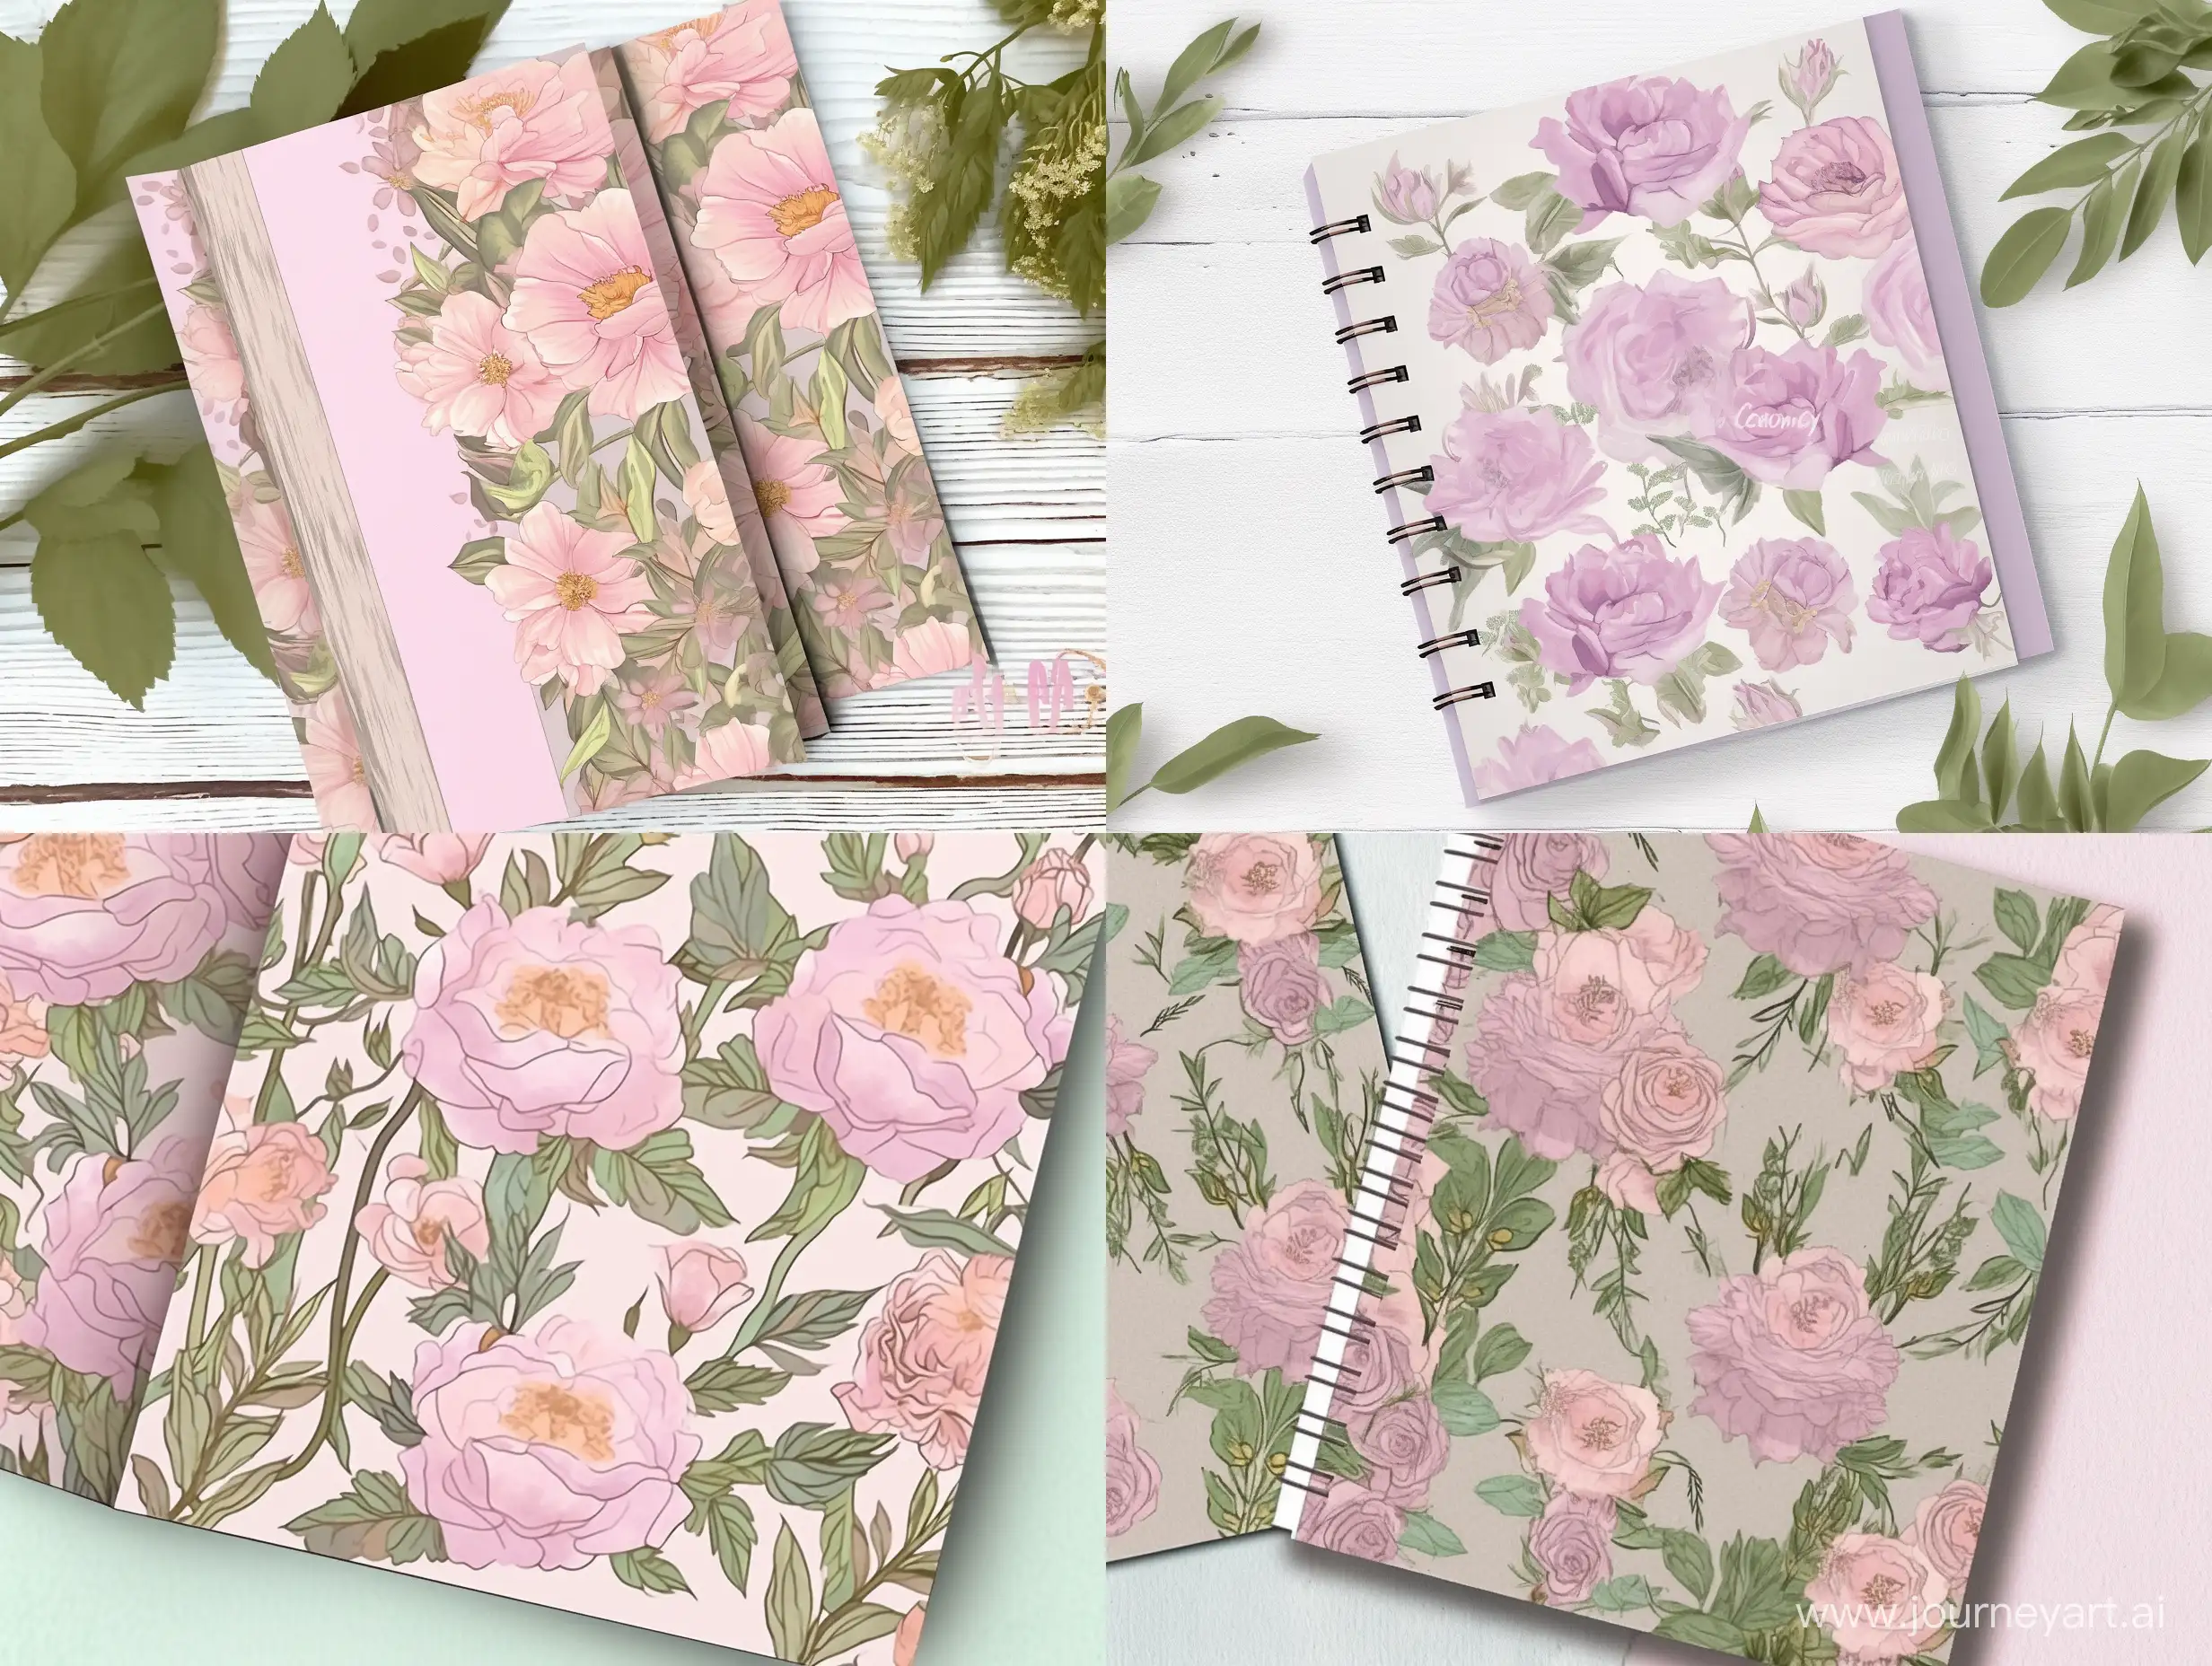 Vintage-Floral-Junk-Journal-Printable-with-Faded-Roses-Shabby-Chic-43-Digital-Paper